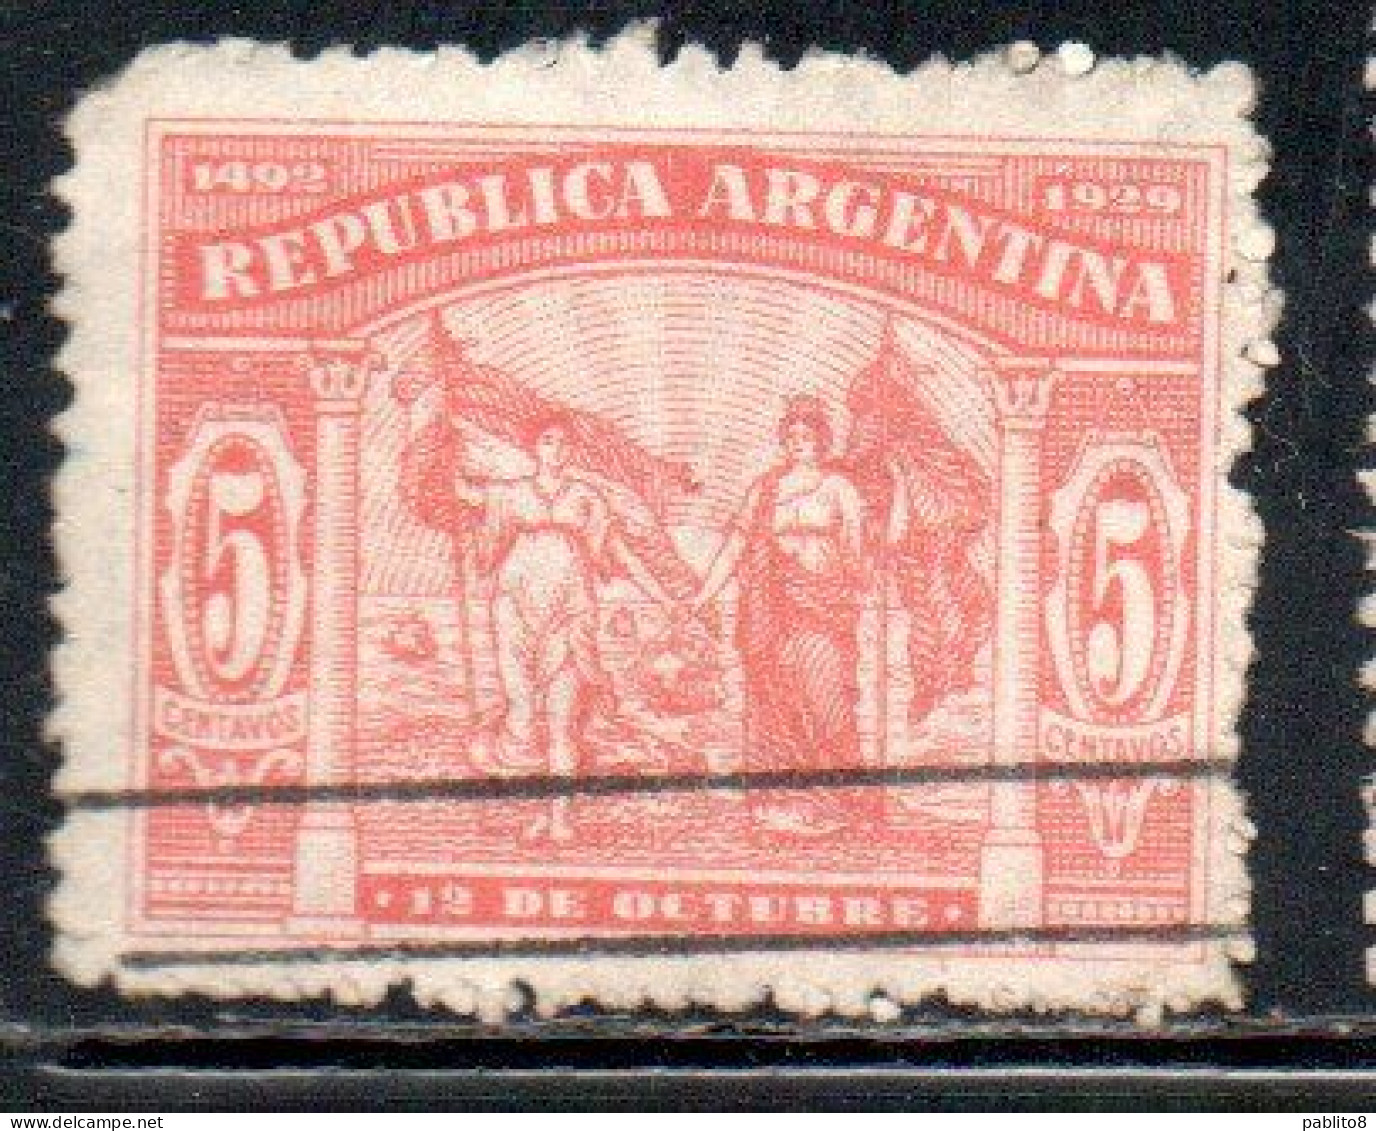 ARGENTINA 1929 DISCOVERY OF AMERICA BY COLUMBUS SPAIN AND ARGENTINA 5c USED USADO OBLITERE' - Oblitérés